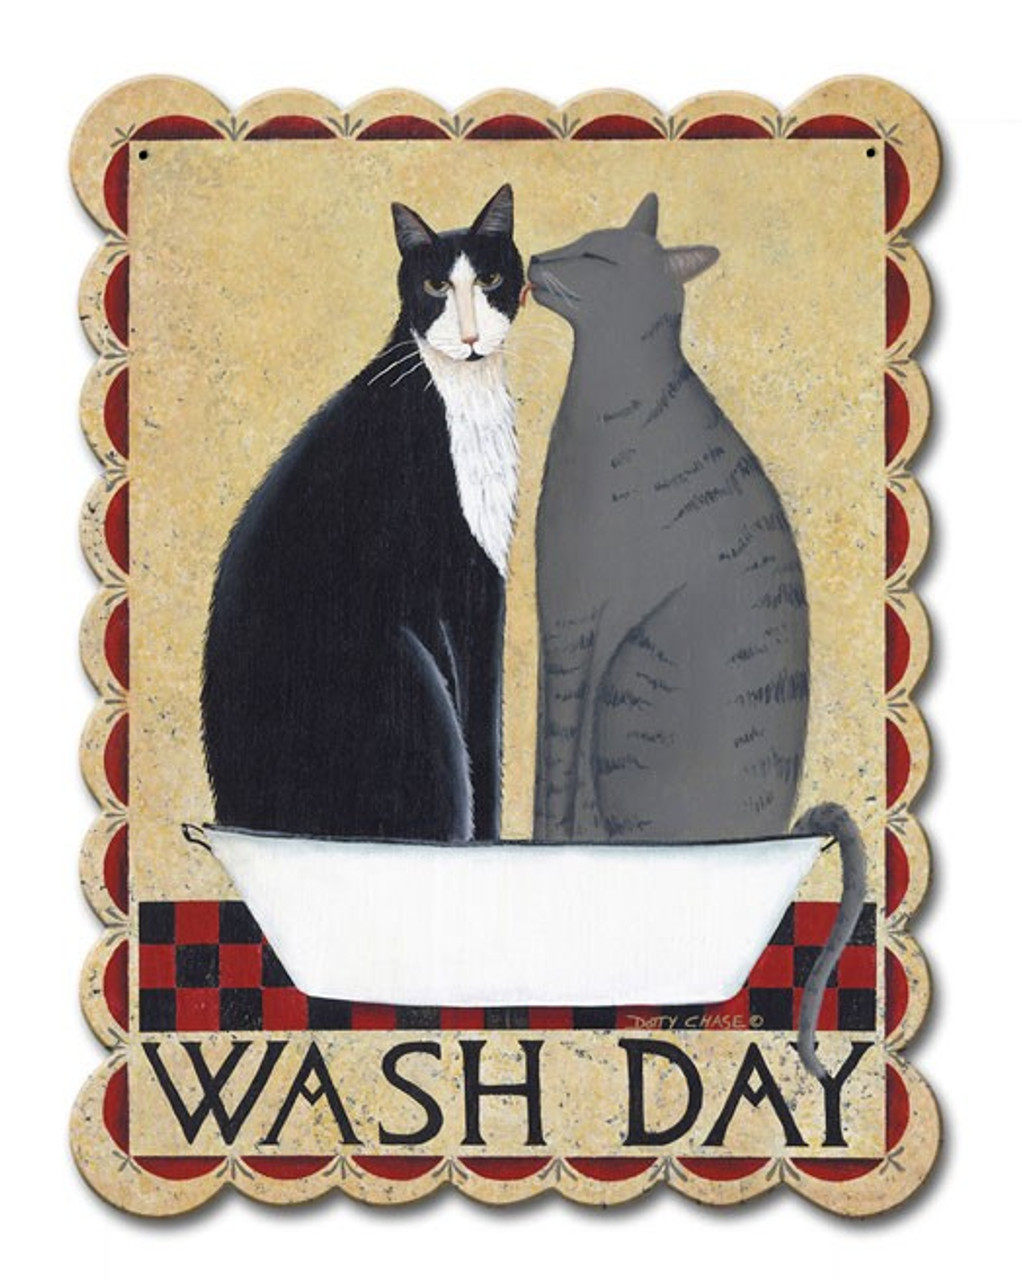 Wash Day Cats Metal Sign 12 x 15 Inches